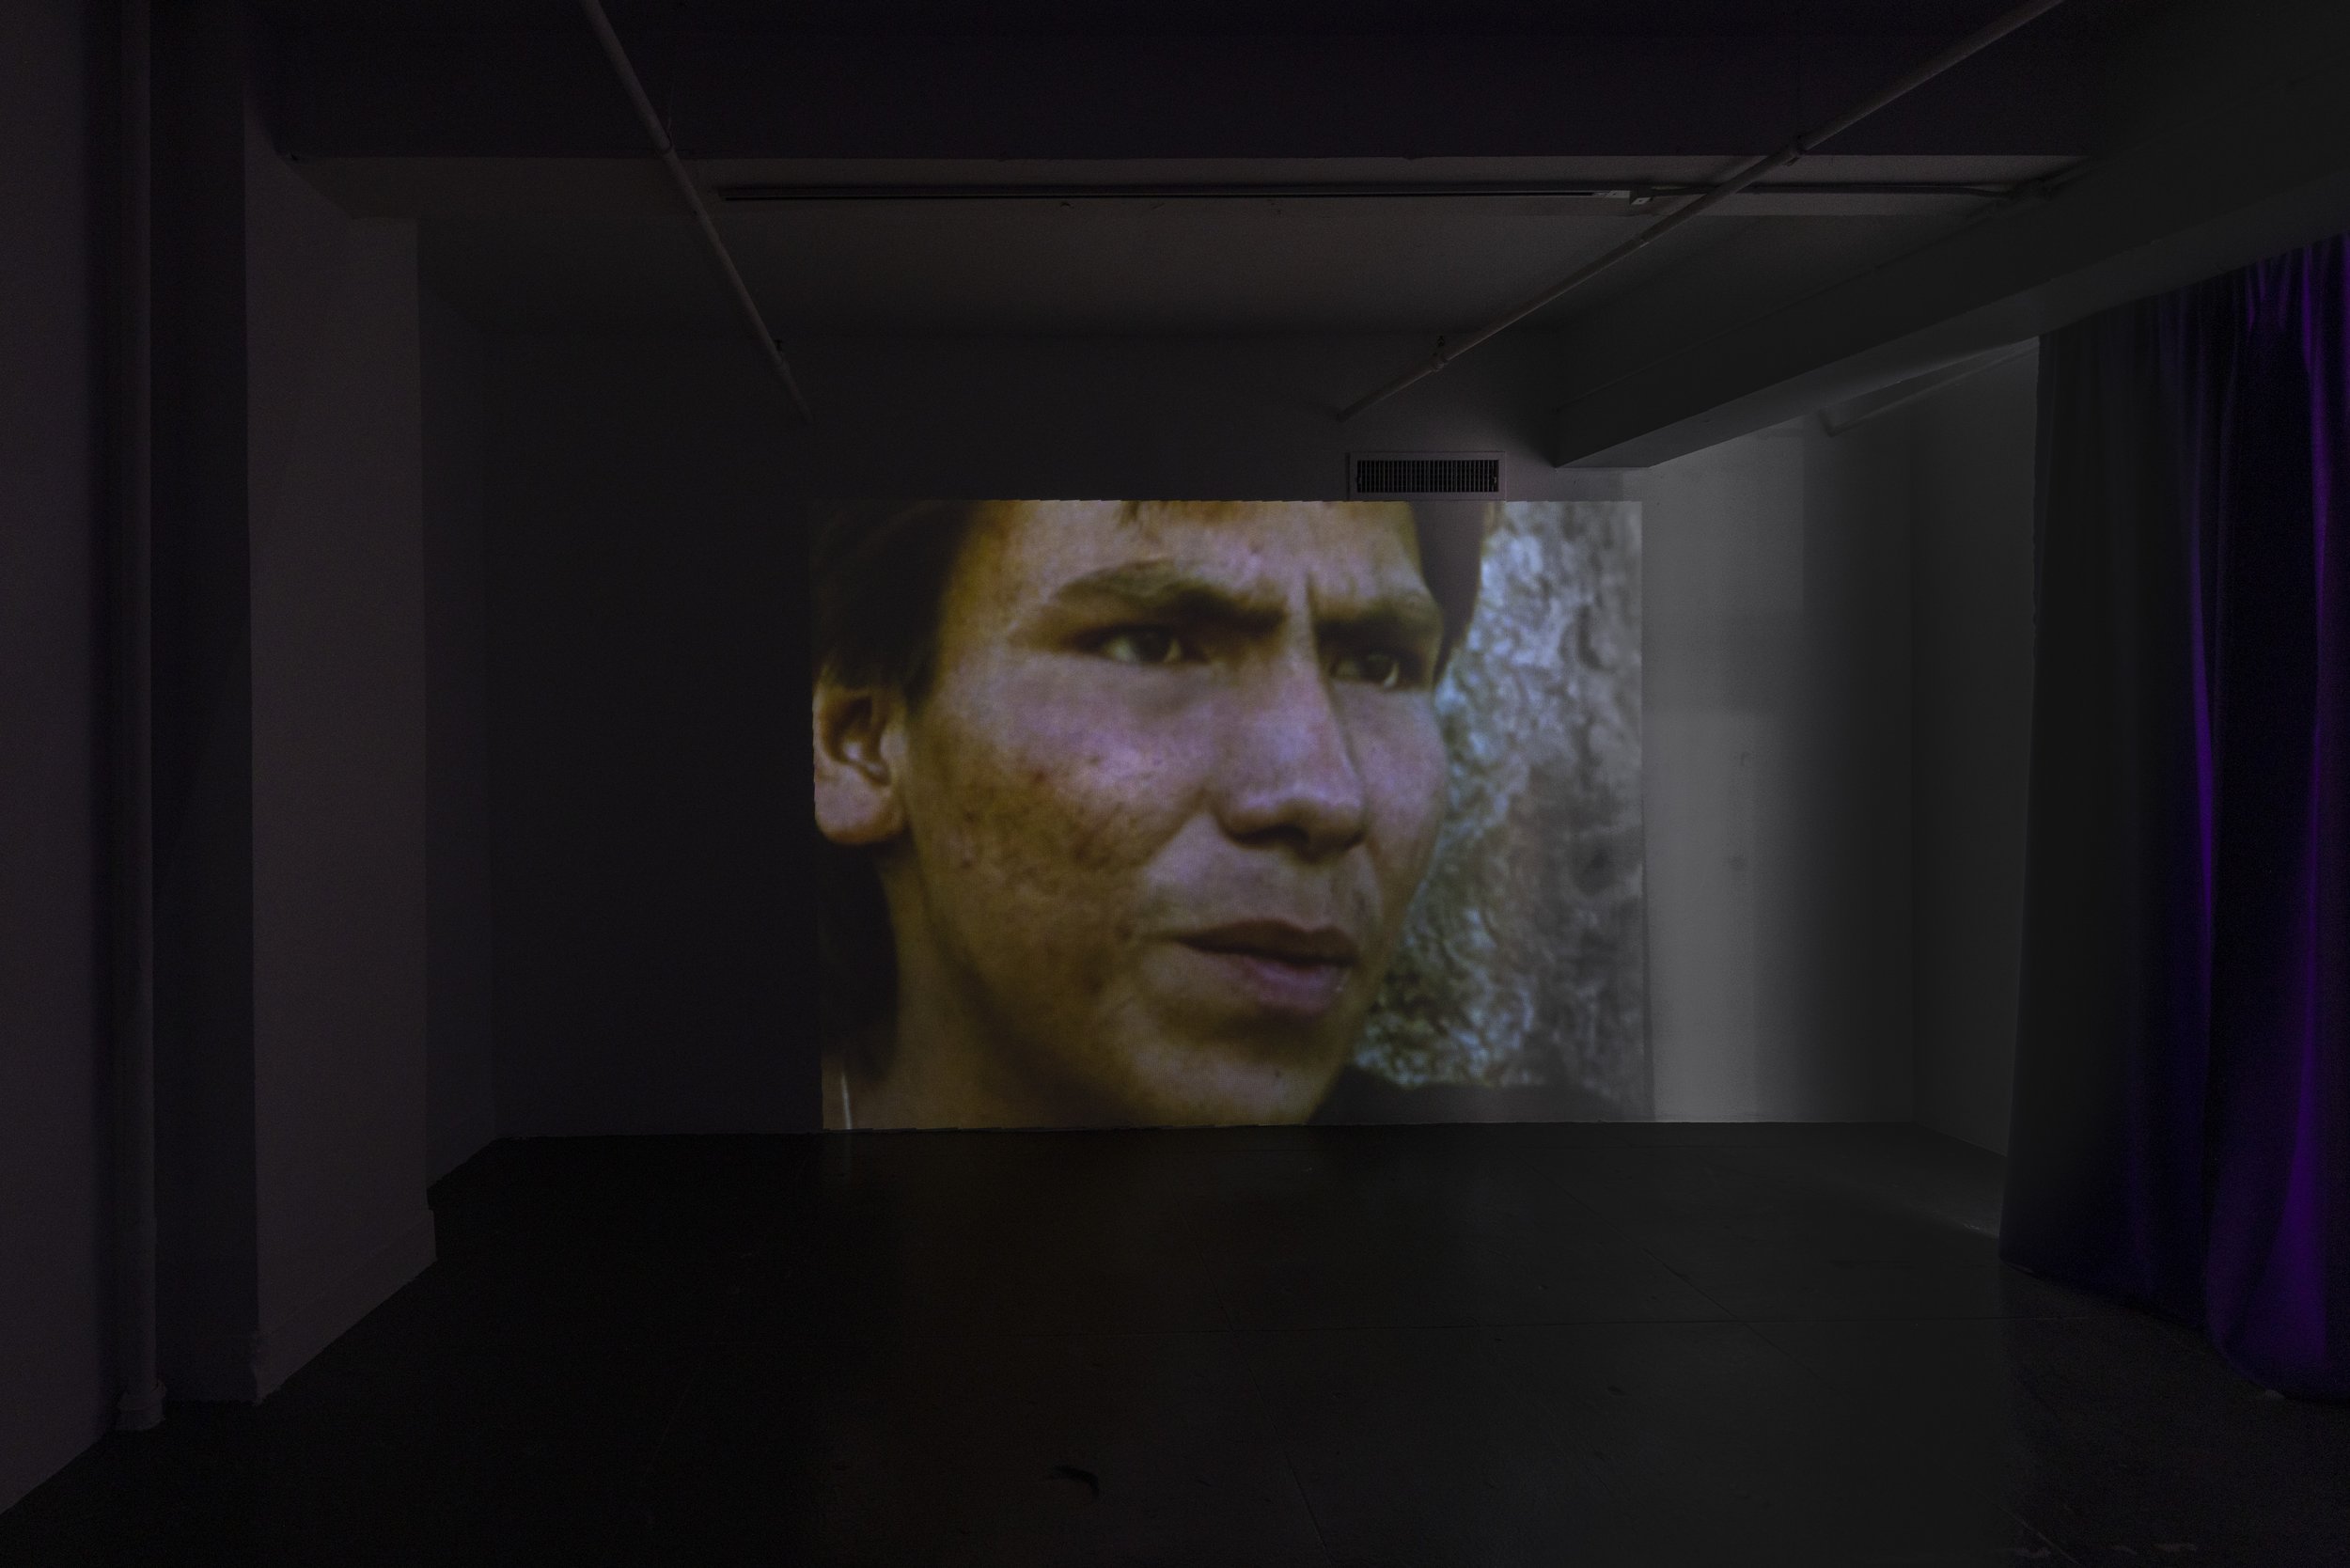  Alanis Obomsawin,  Richard Cardinal: Cry from a Diary of a Metis Child,  1986. Video, 29 mins.   